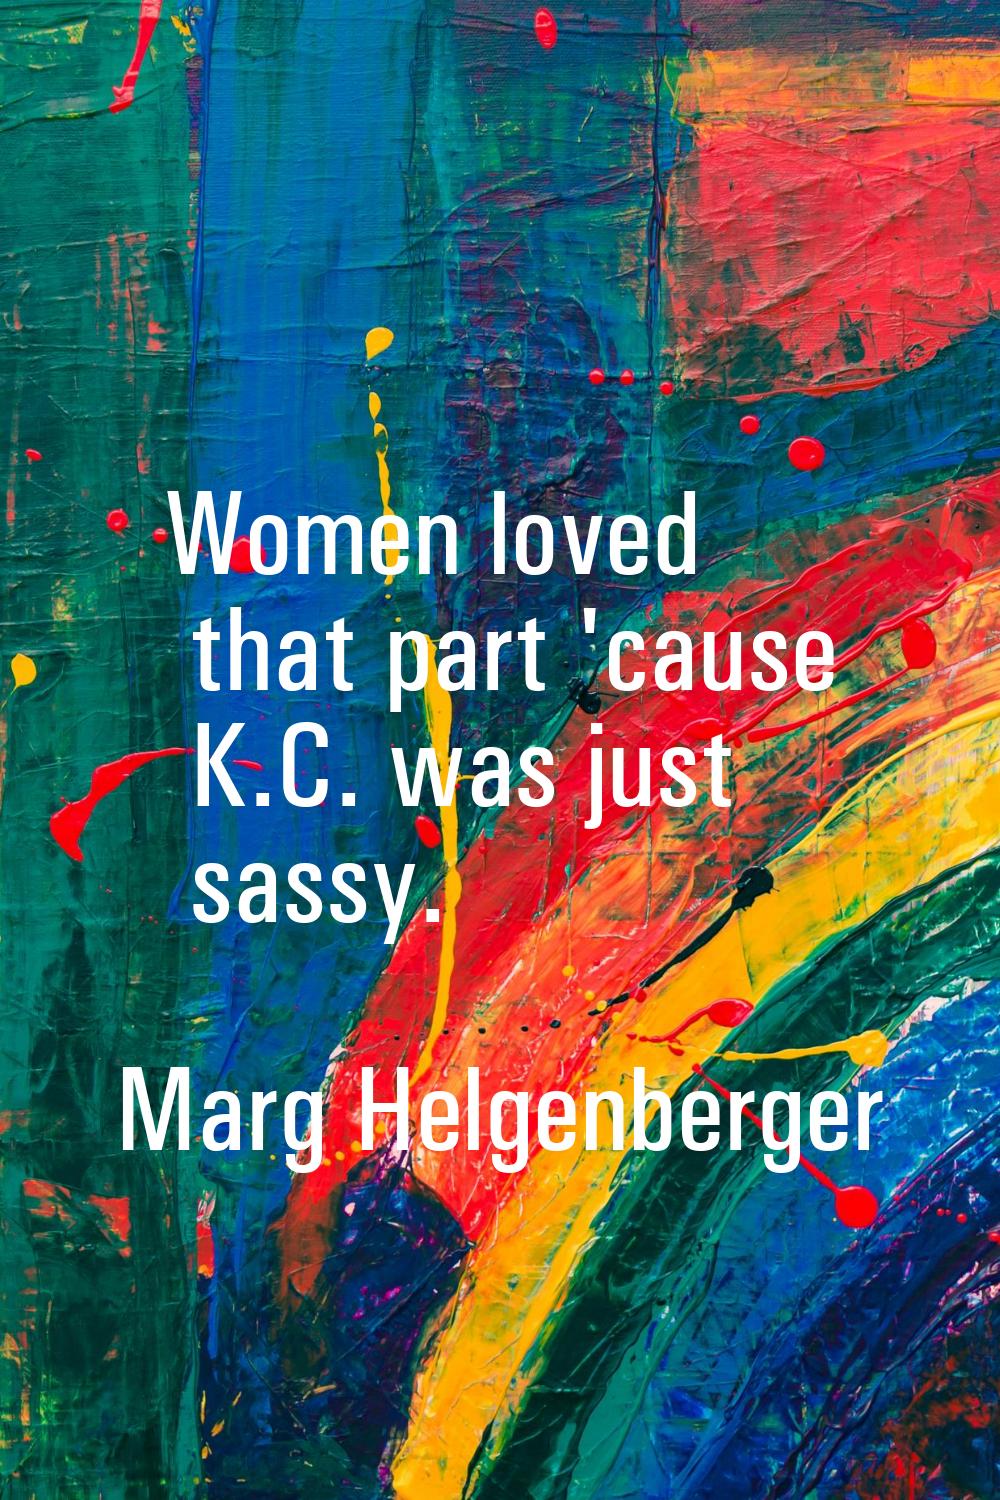 Women loved that part 'cause K.C. was just sassy.